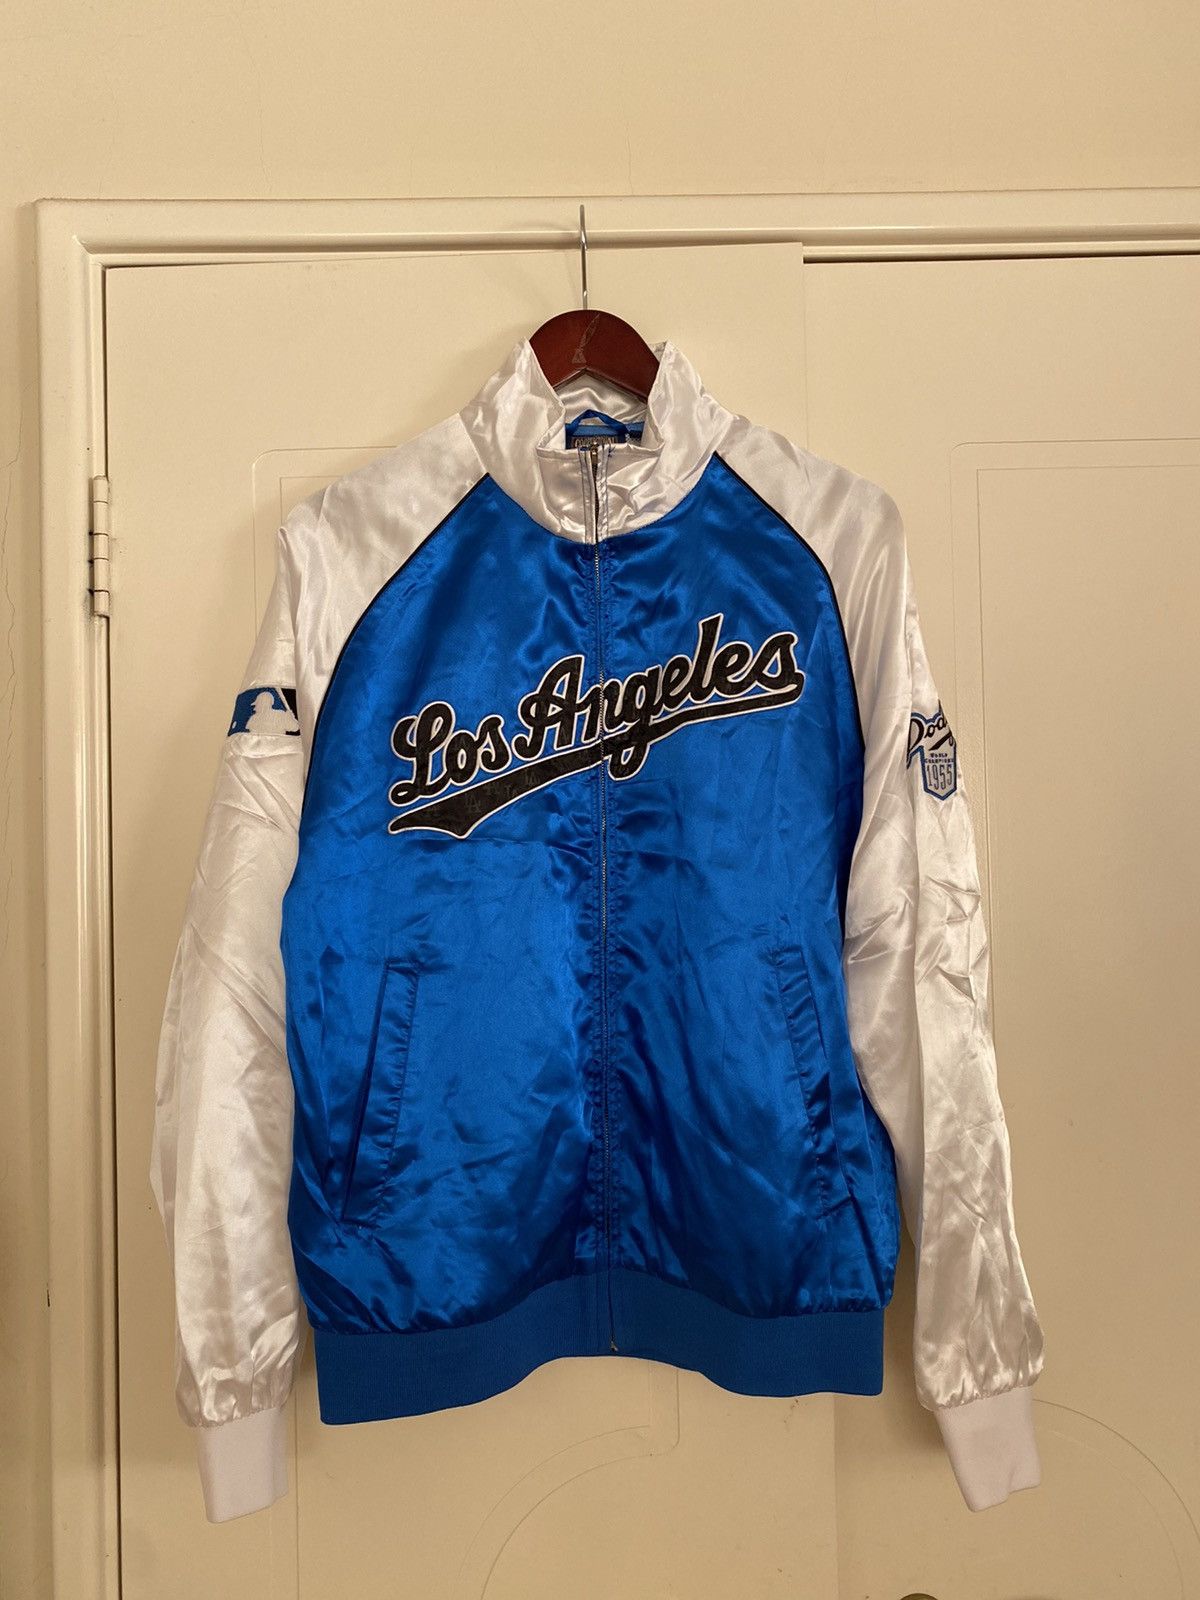 MAJESTIC ATHLETIC VINTAGE JACKET LOS ANGLOS DODGERS COLOR BLUE AND WHITE  SIZE S